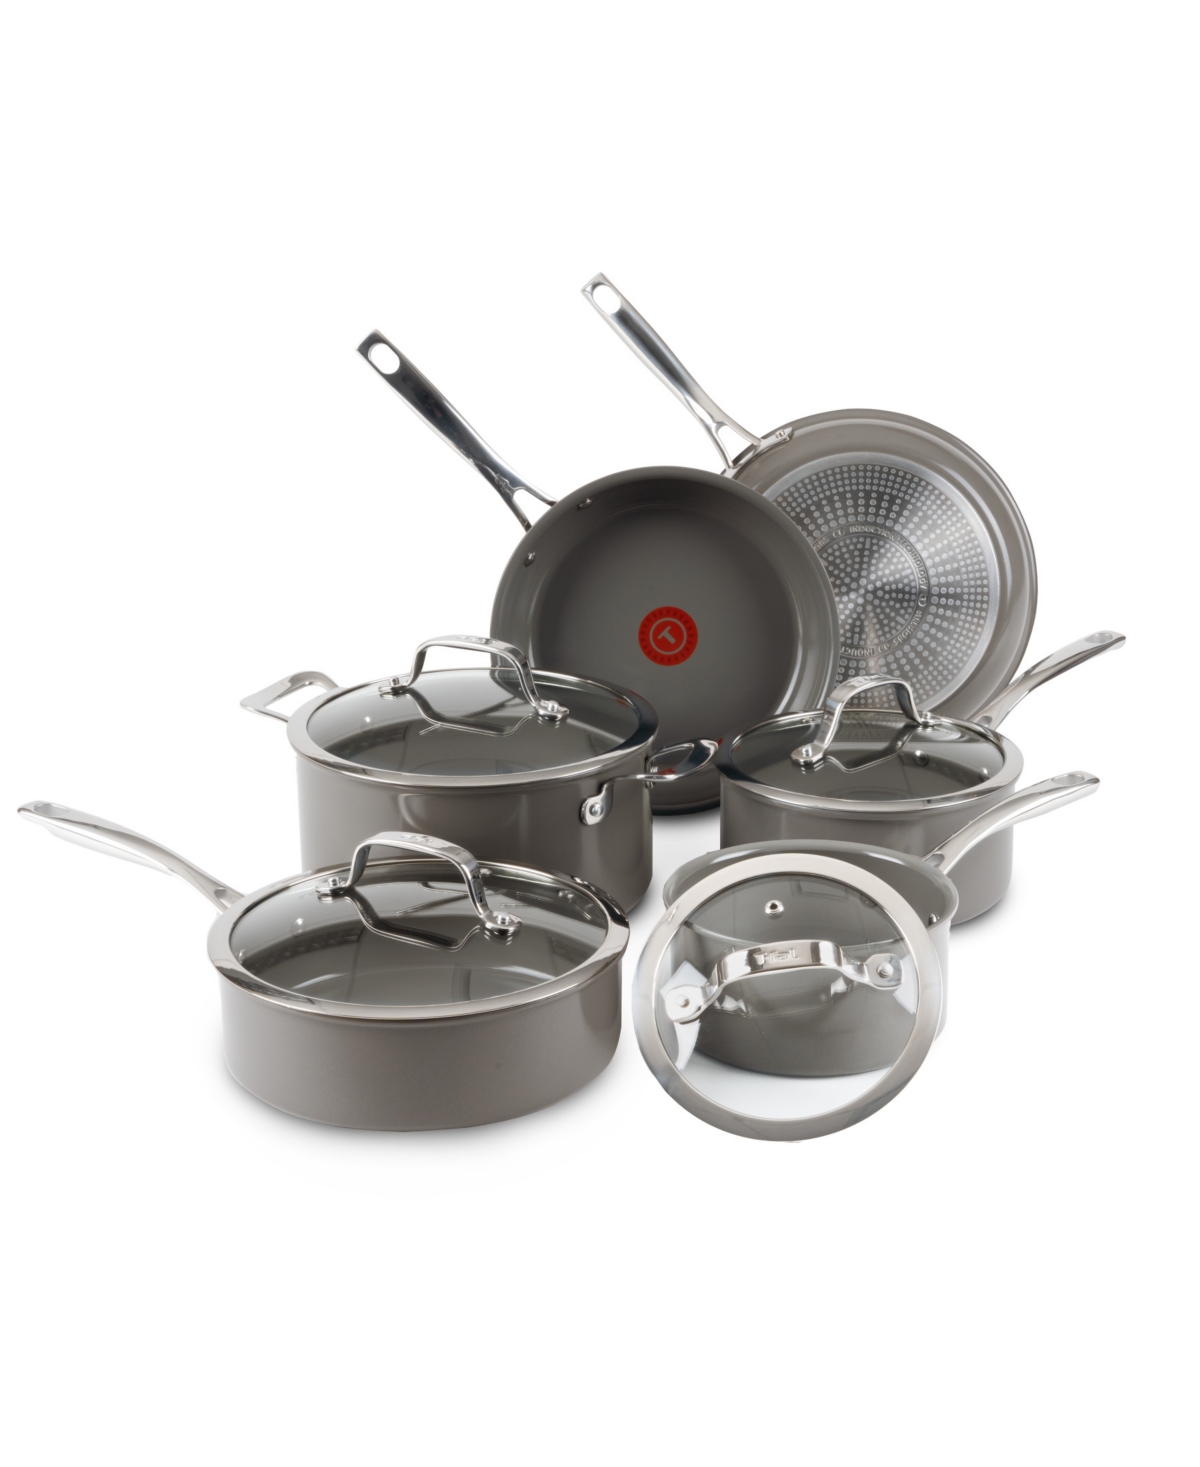 T-fal Ceramic Excellence Nonstick 10 Piece Cookware Set In Gray